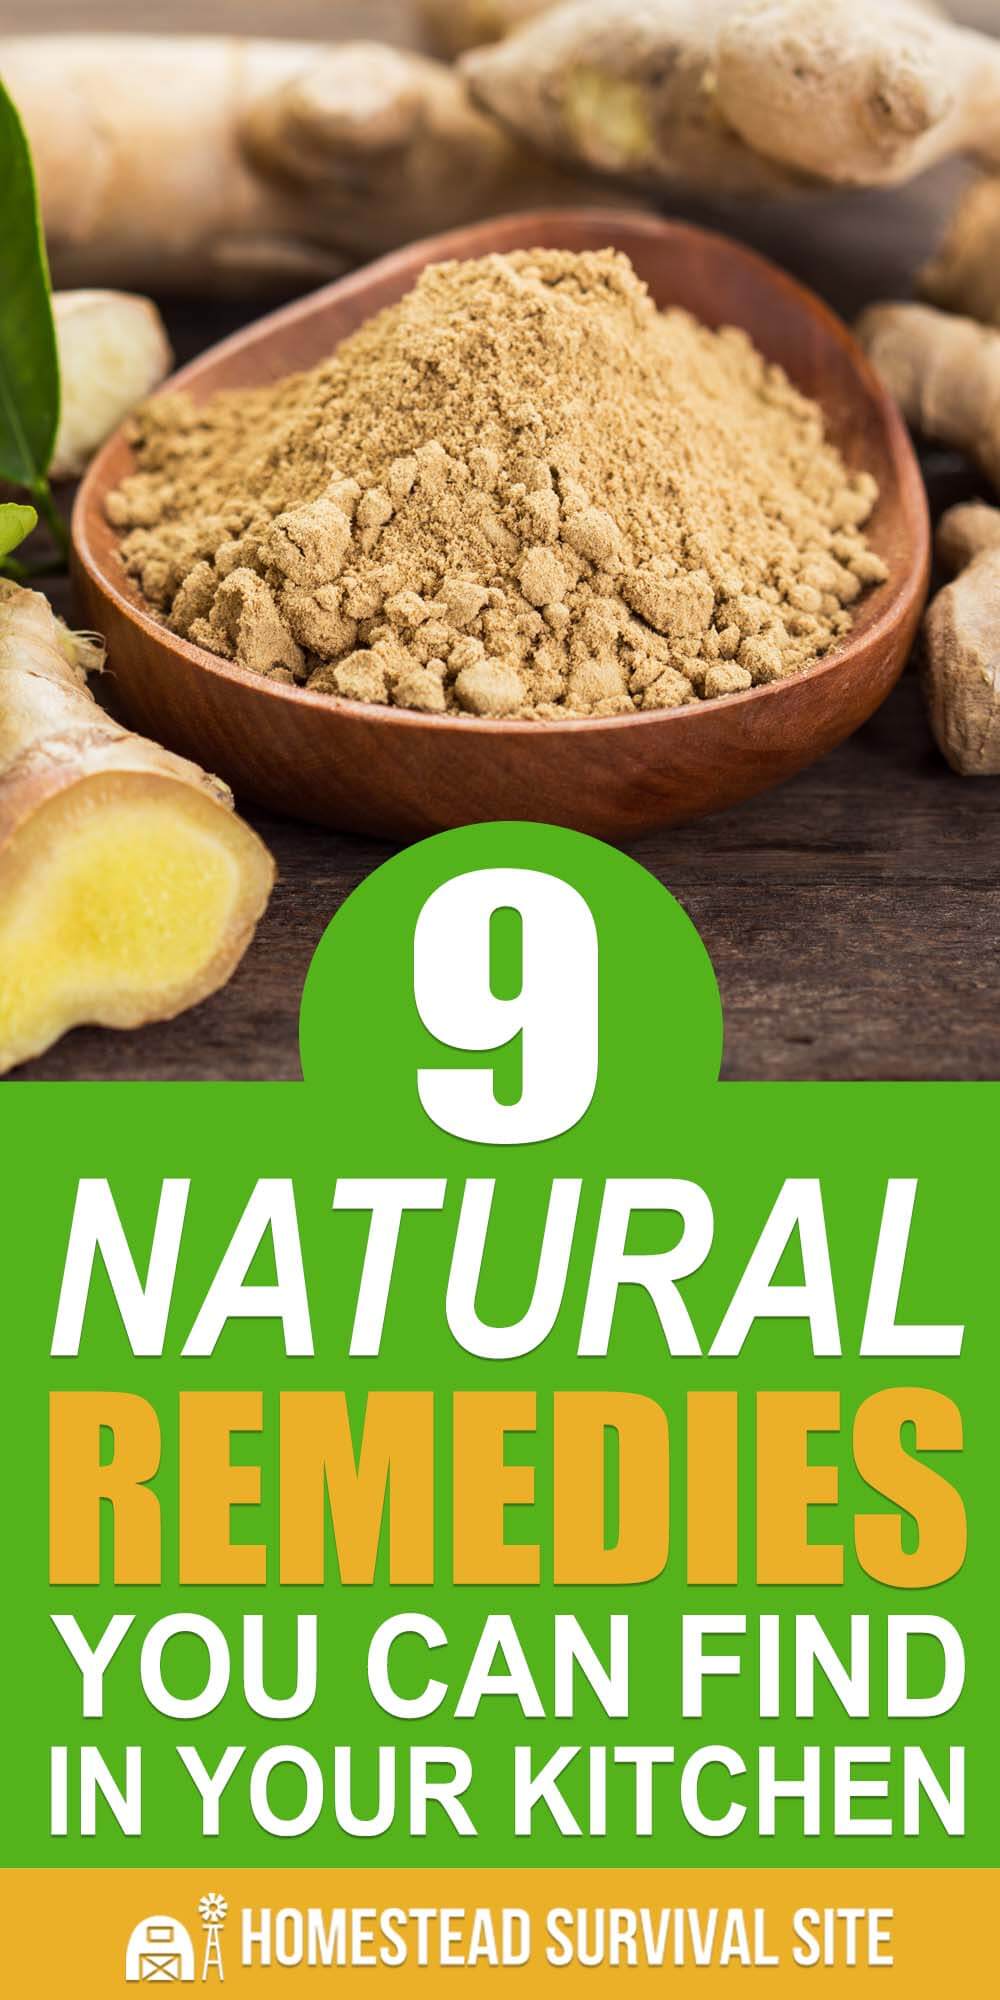 9 Natural Remedies You Can Find In Your Kitchen